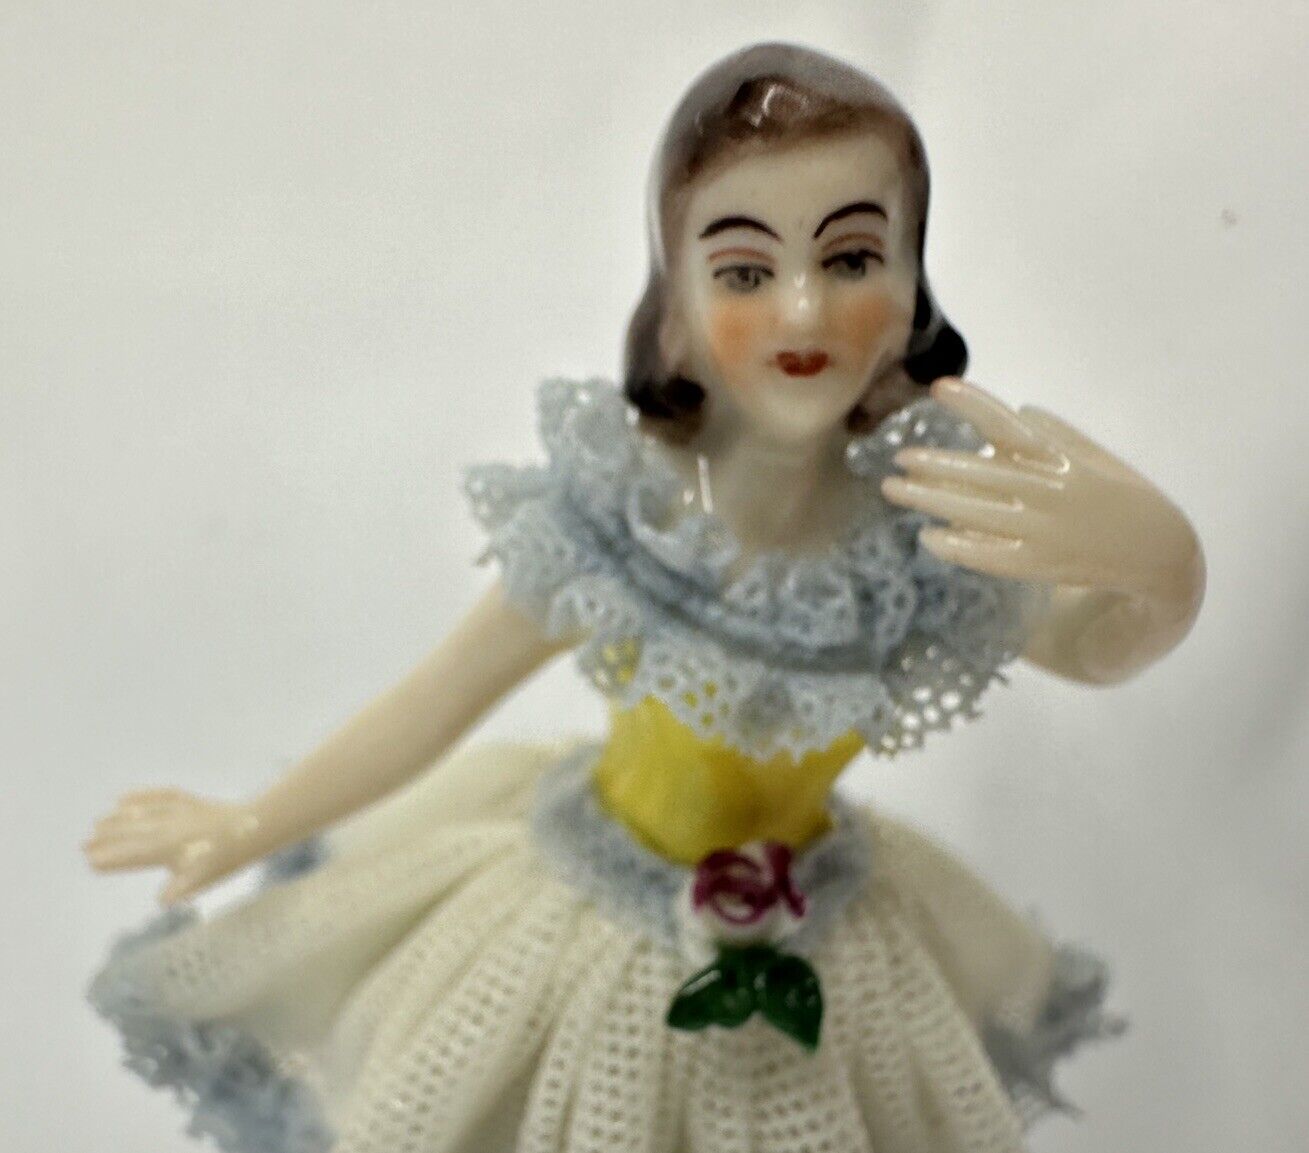 Antique Hand Crafted Porcelain Lace Girl Ballerina Figurine Dresden Germany 3” 